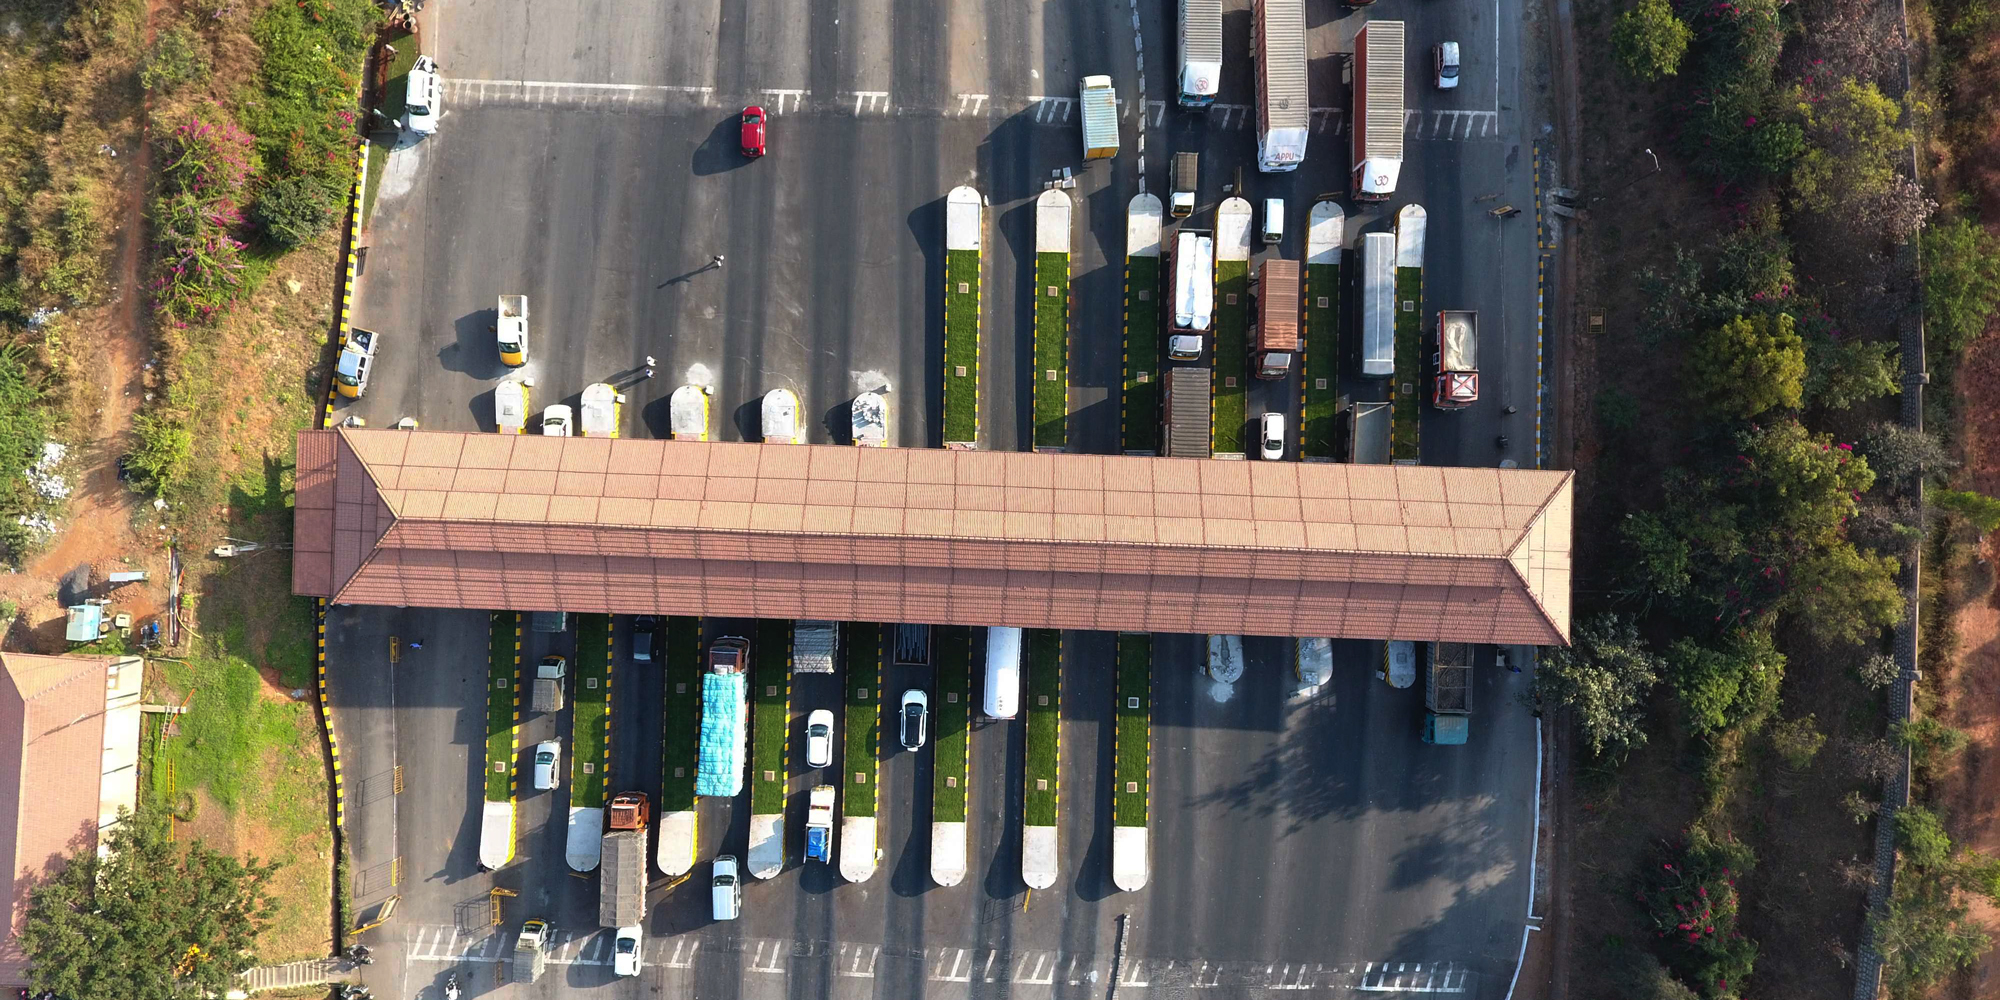 Overhead view of automobiles lined up at a toll booth